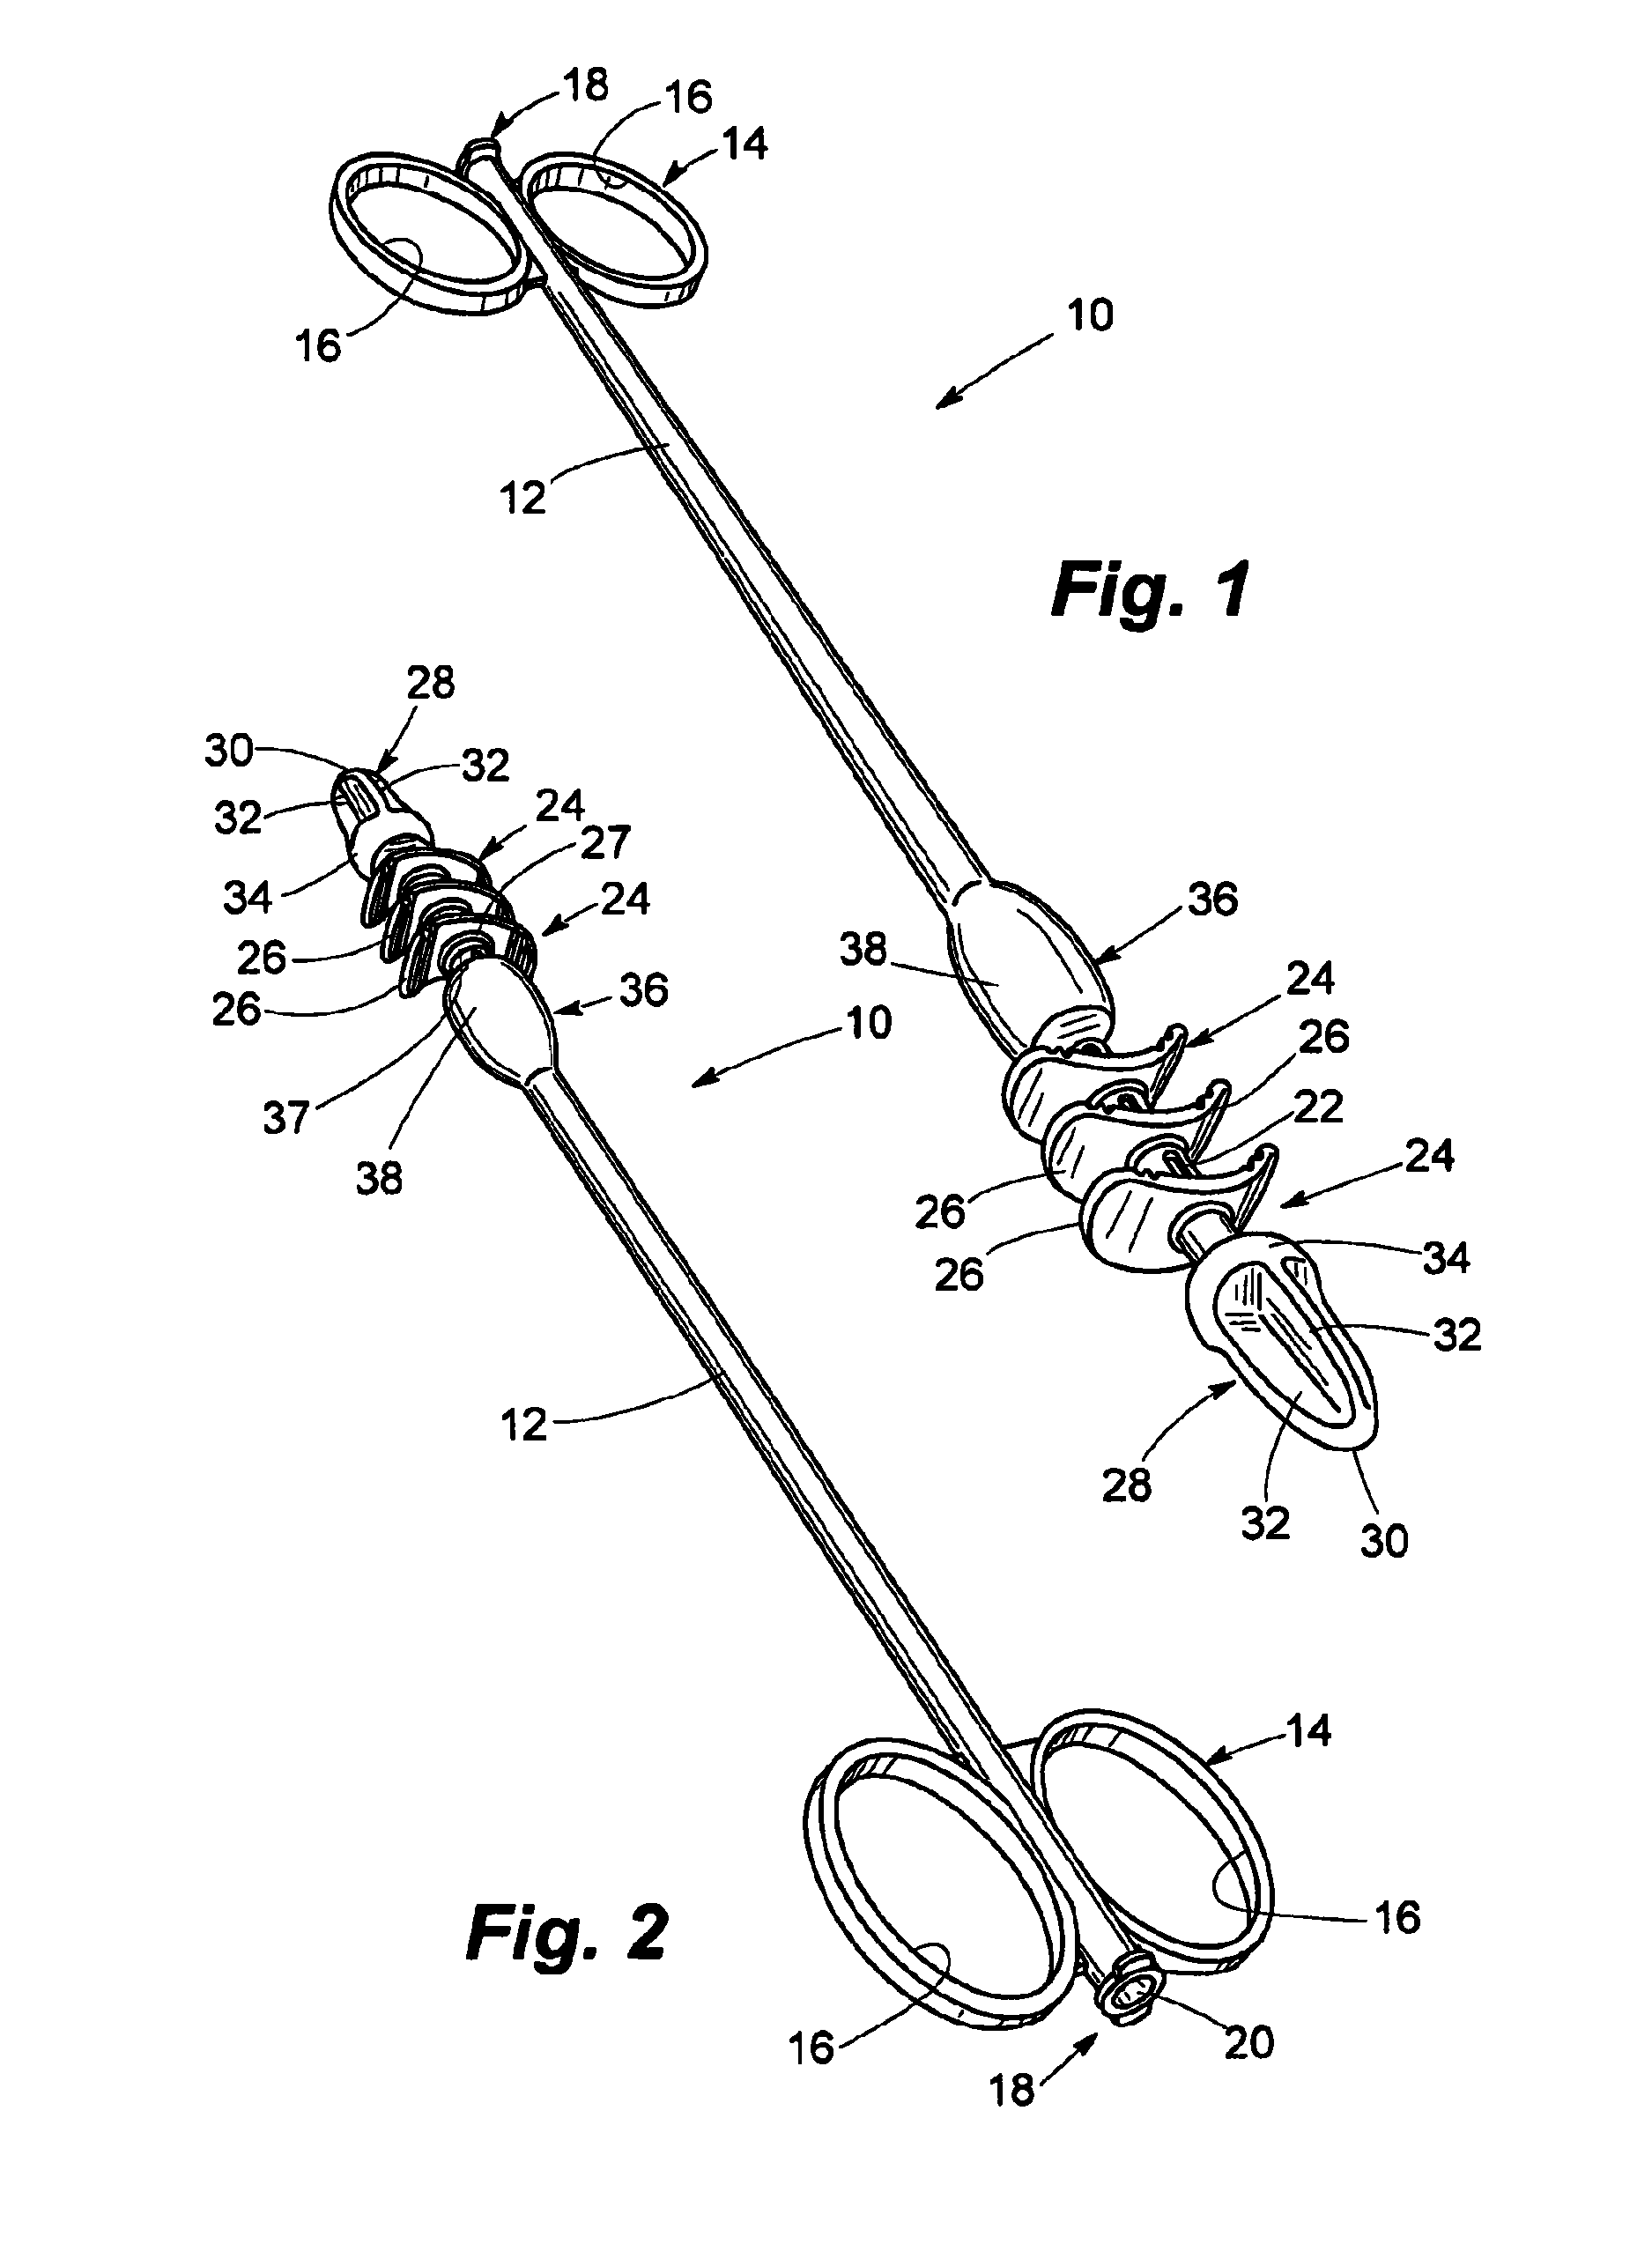 Fecal impaction removal tool